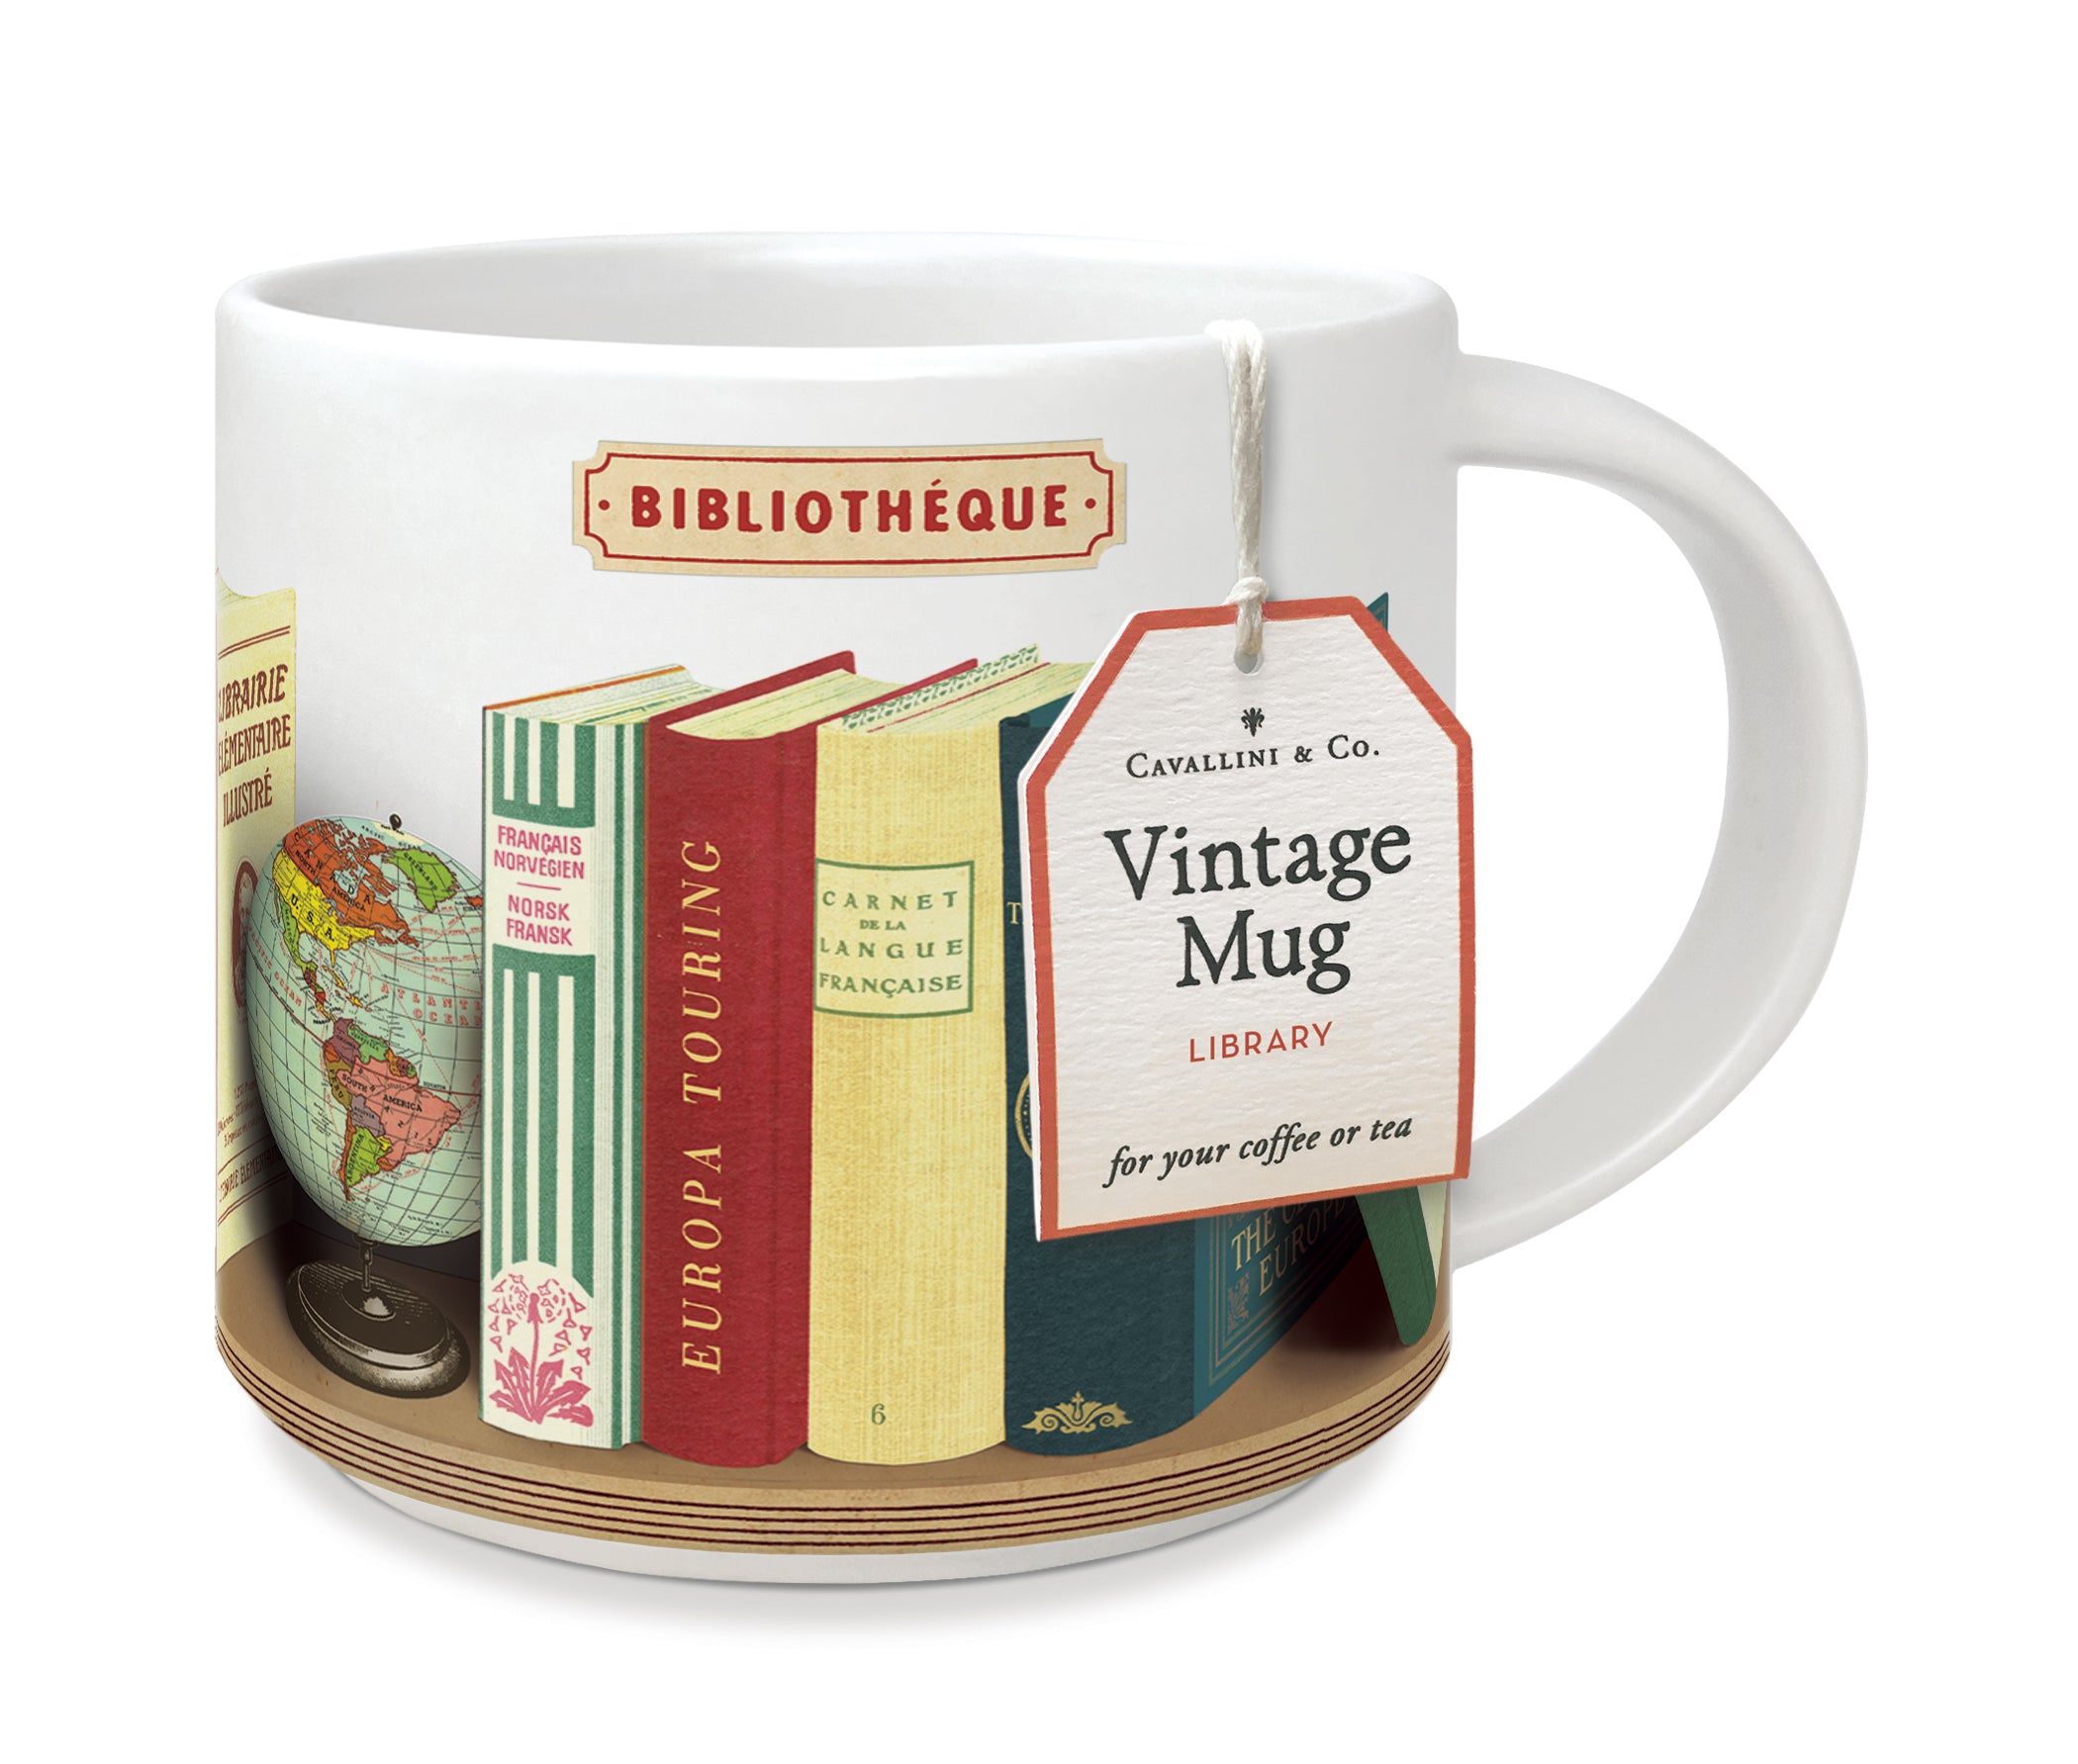 5.5&quot; x 7.6&quot; ceramic mug with library books design and hang tag